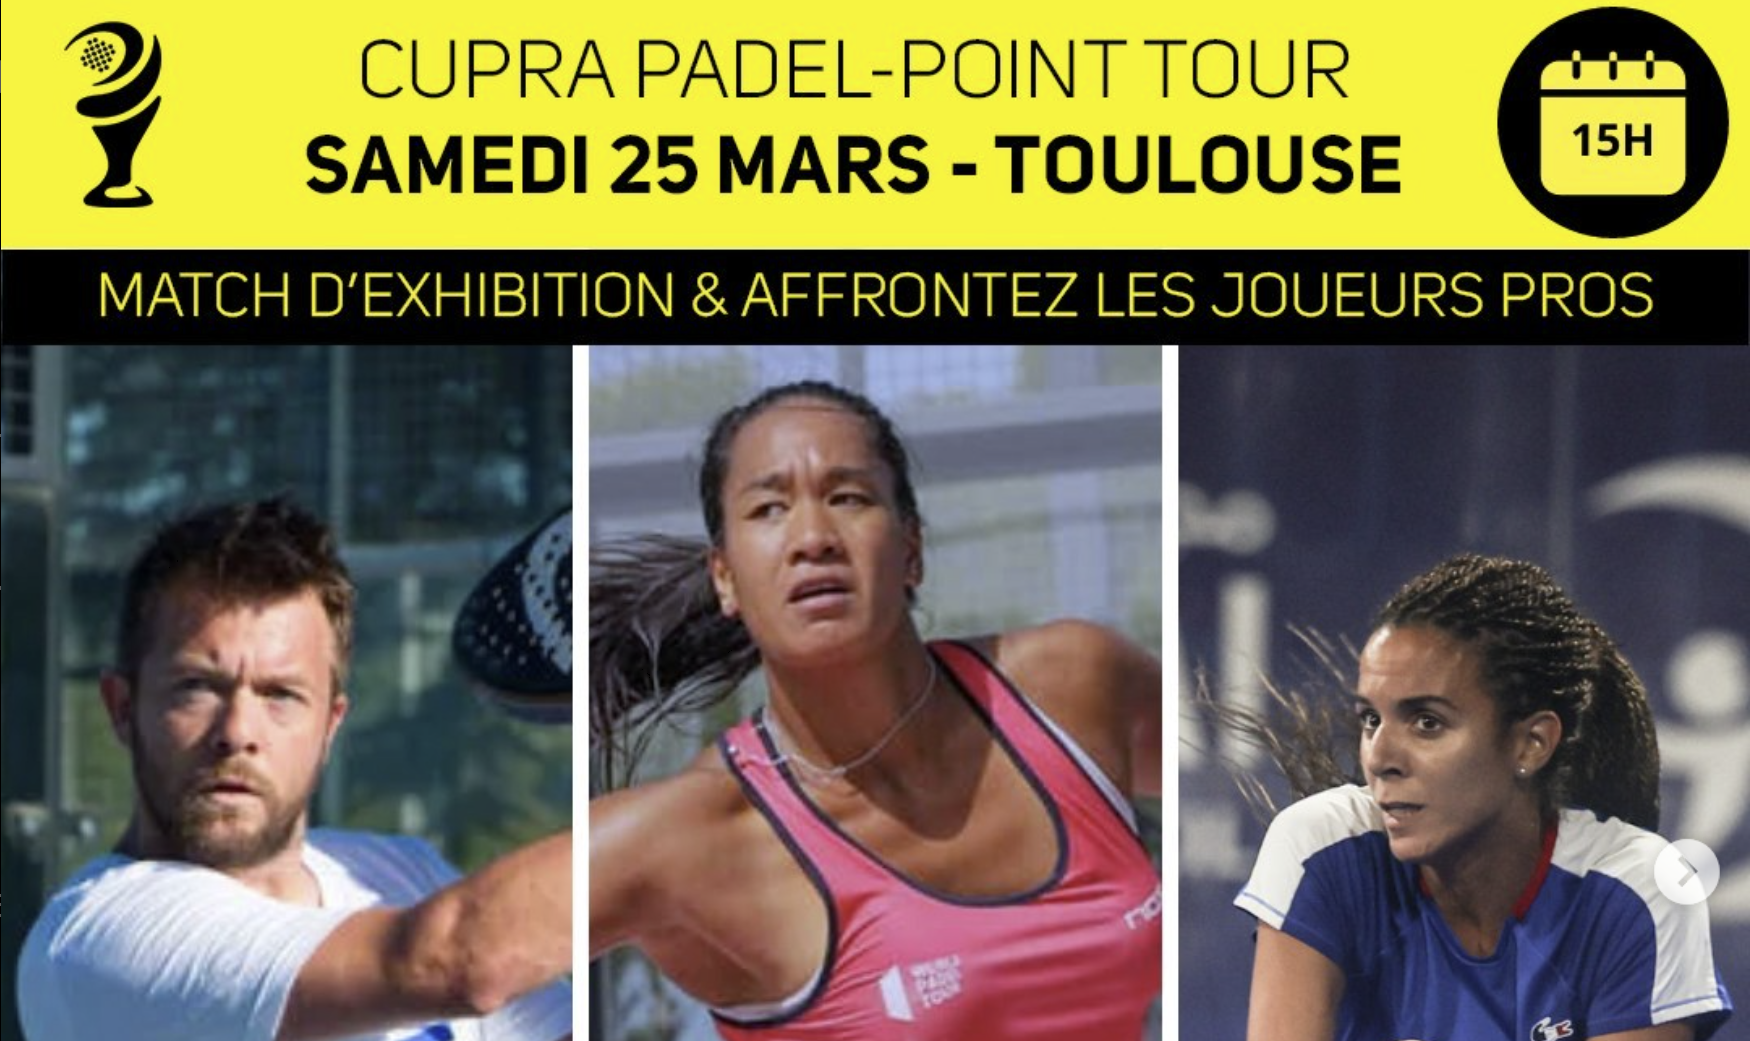 C Padel-Point Tour sbarco alle 4Padel Toulouse